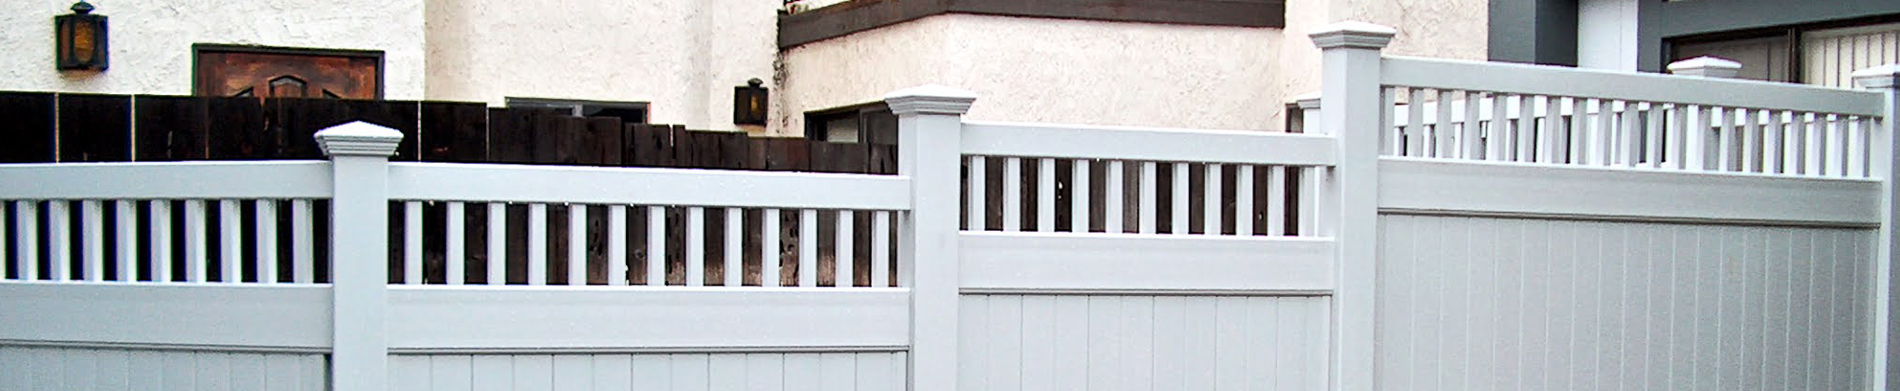 Interested in a perimeter fence? Duramax manufactures various types of vinyl fences in the USA